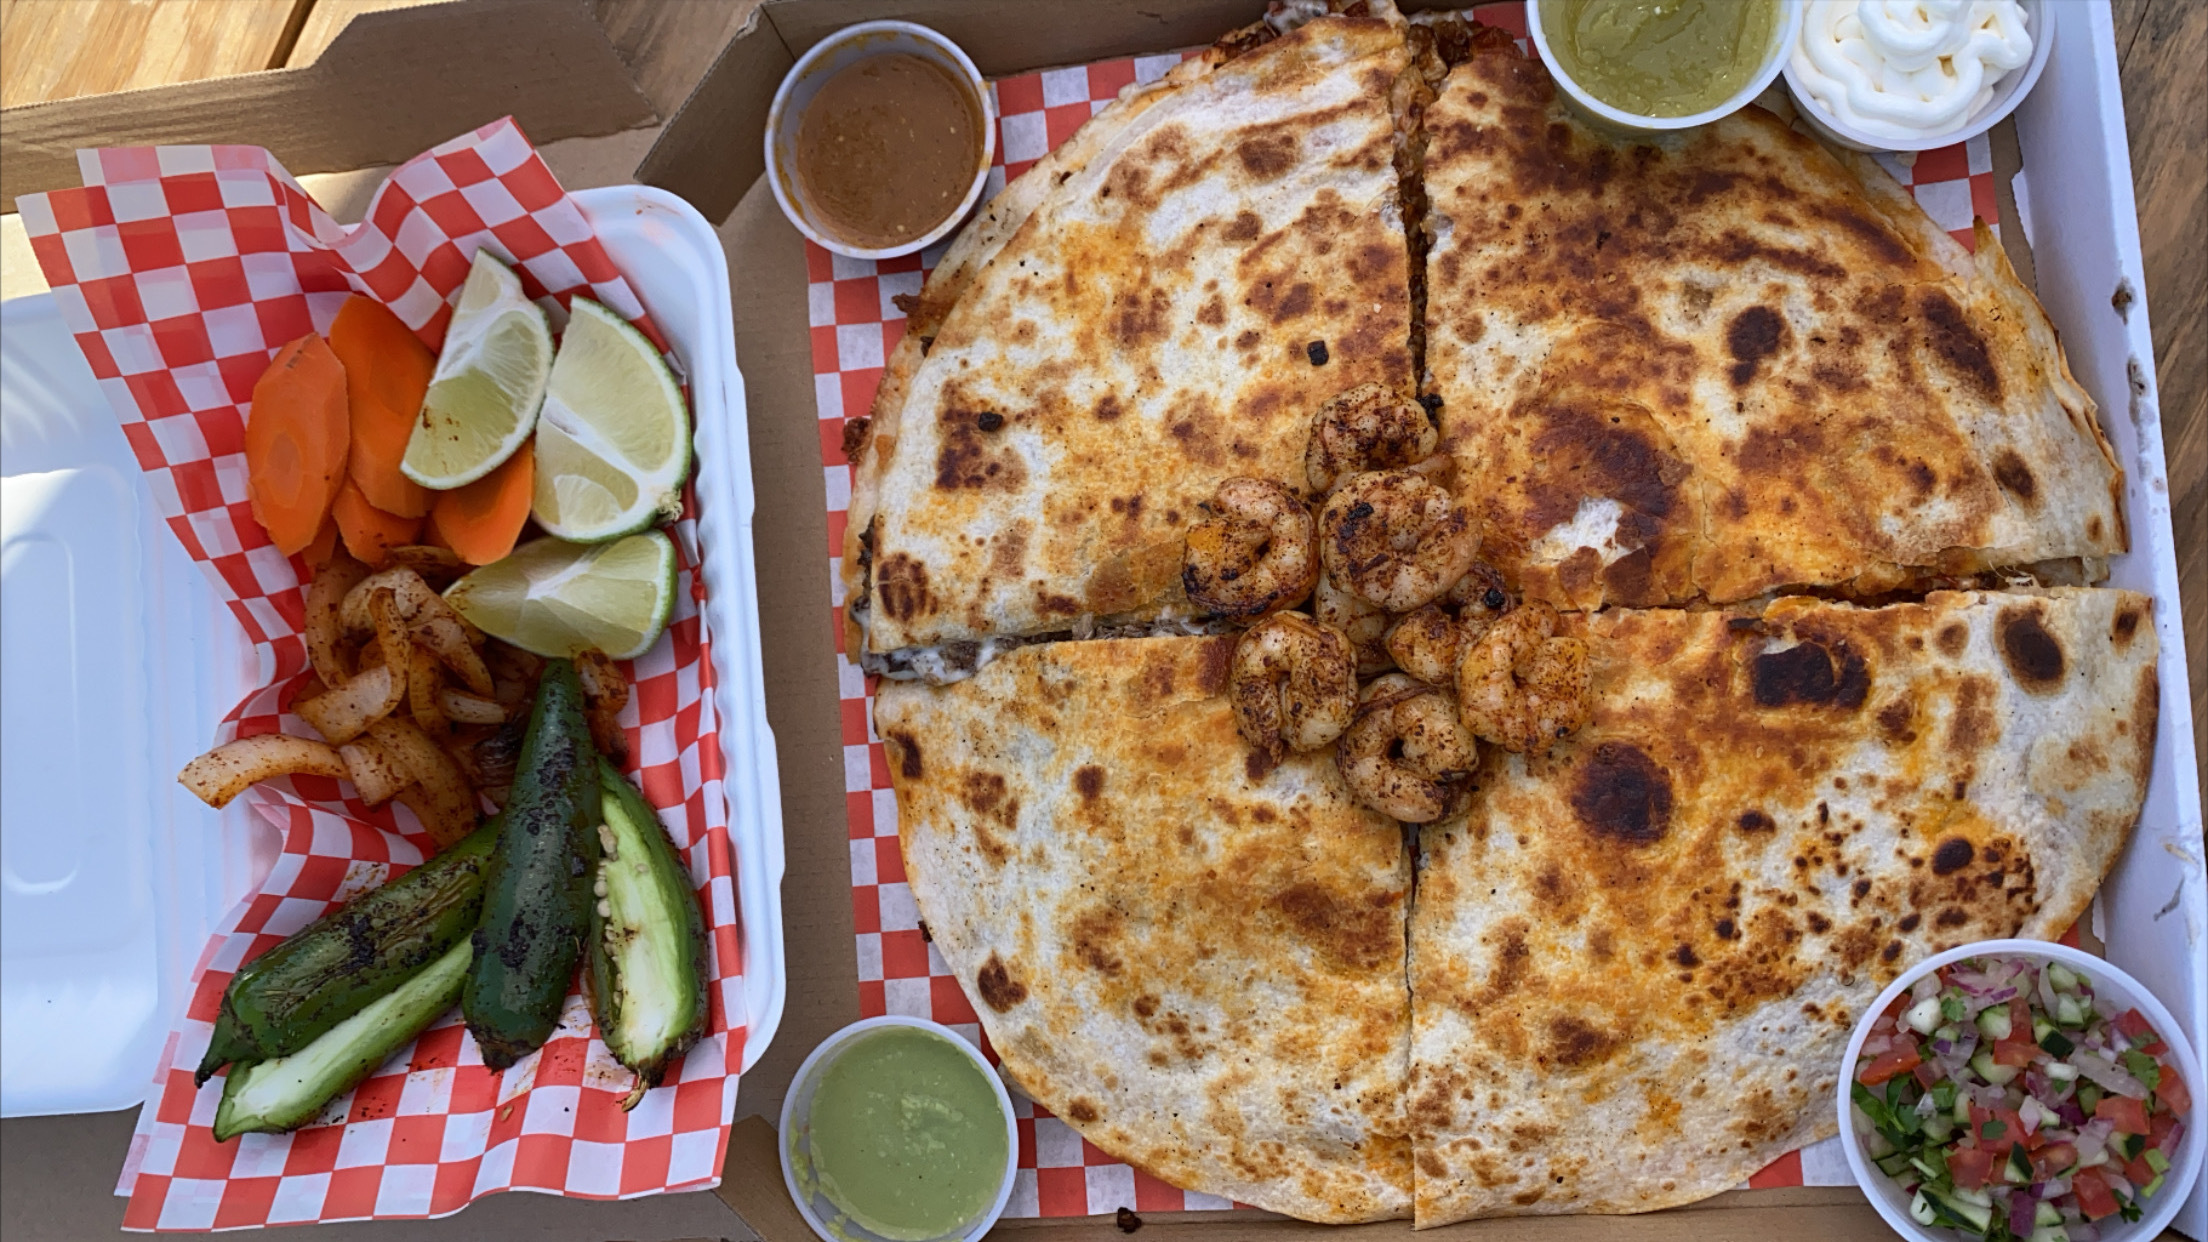 A shrimp “pizza mula”: a cheesy triple-decker quesadilla cut into quarters and served inside a pizza box, with tubs of salsa, grilled jalapenos, and limes on the side